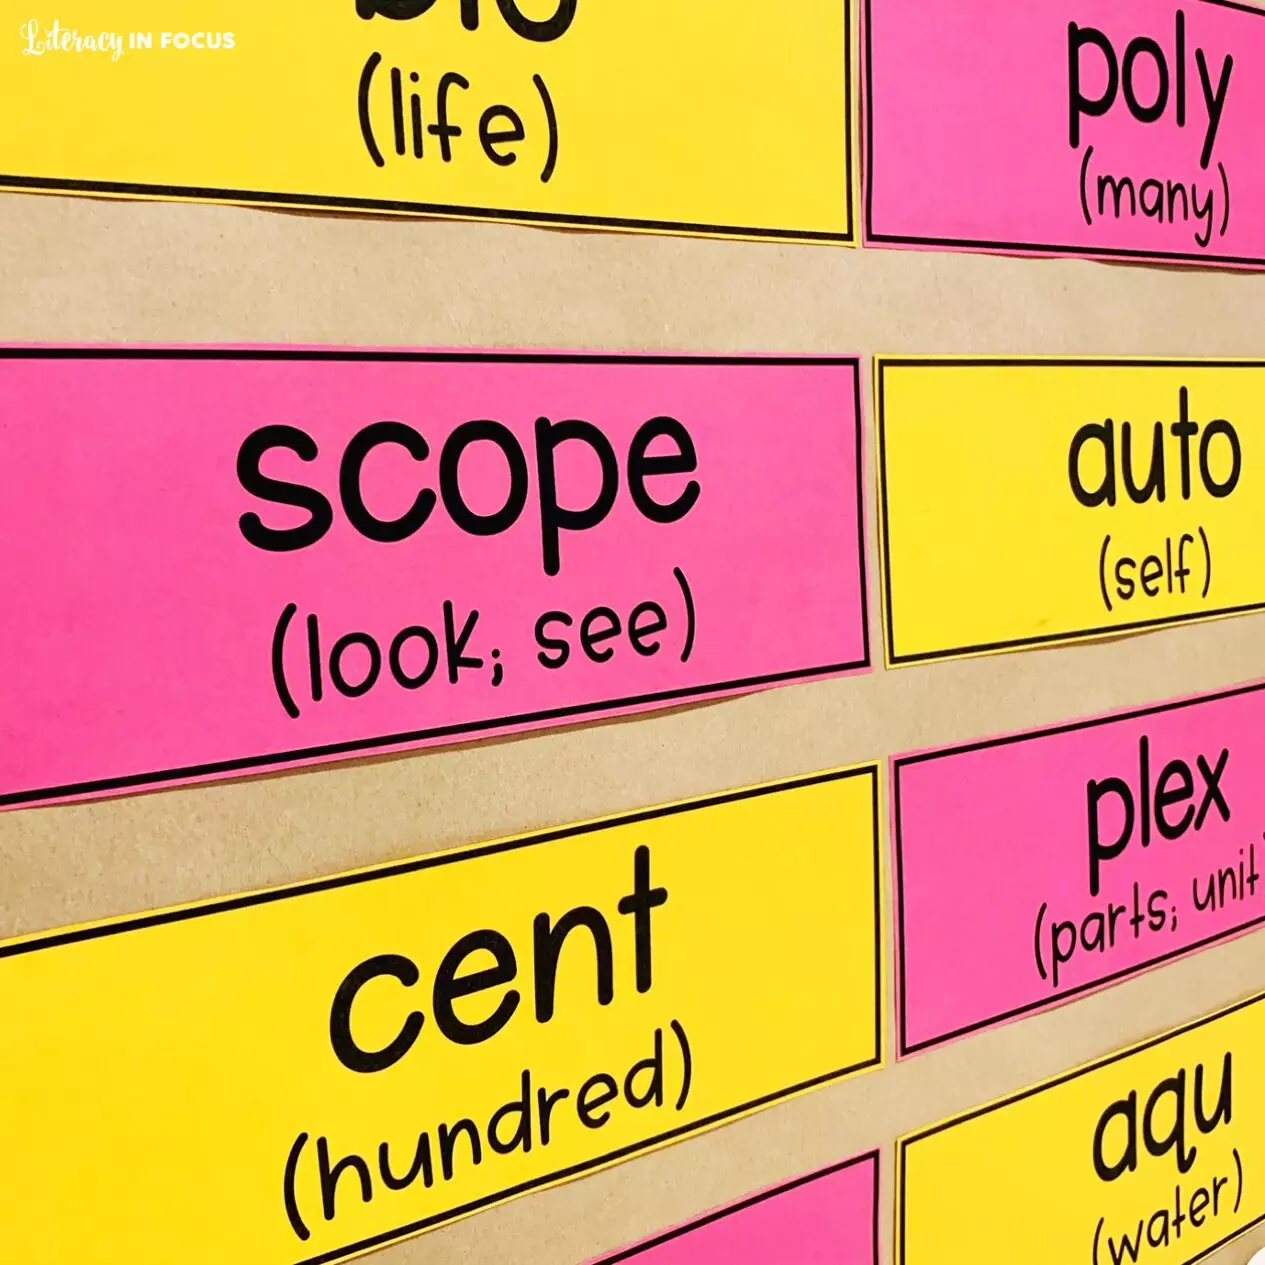 25 Vocabulary Activities To Use With Your Classroom Word Wall